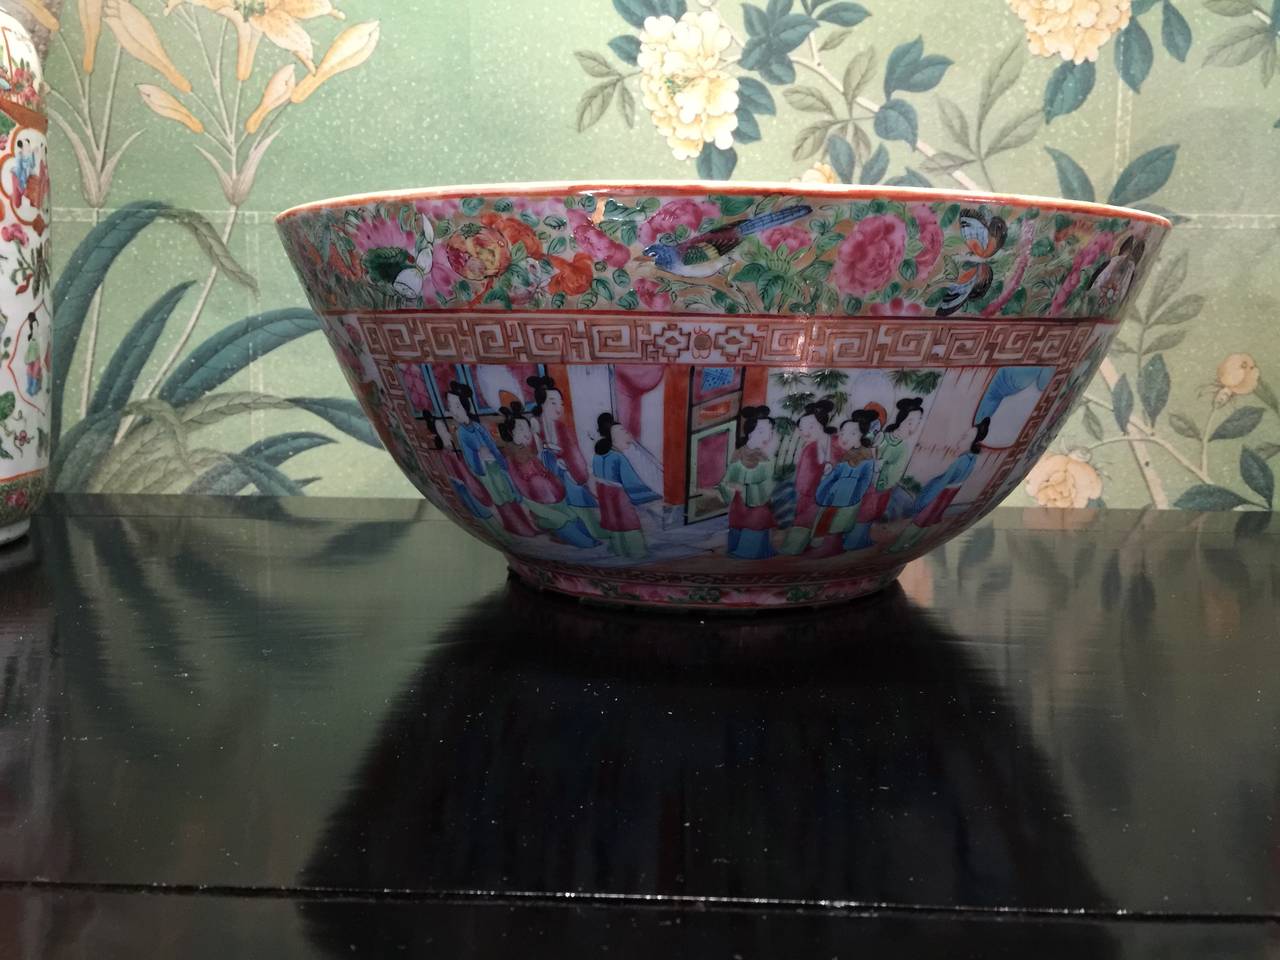 19th century, Chinese large rose medallion bowl with reserves of landscape and figure design and borders with flowers, birds and butterflies.

The reserves have borders with gilt, in Greek key pattern.